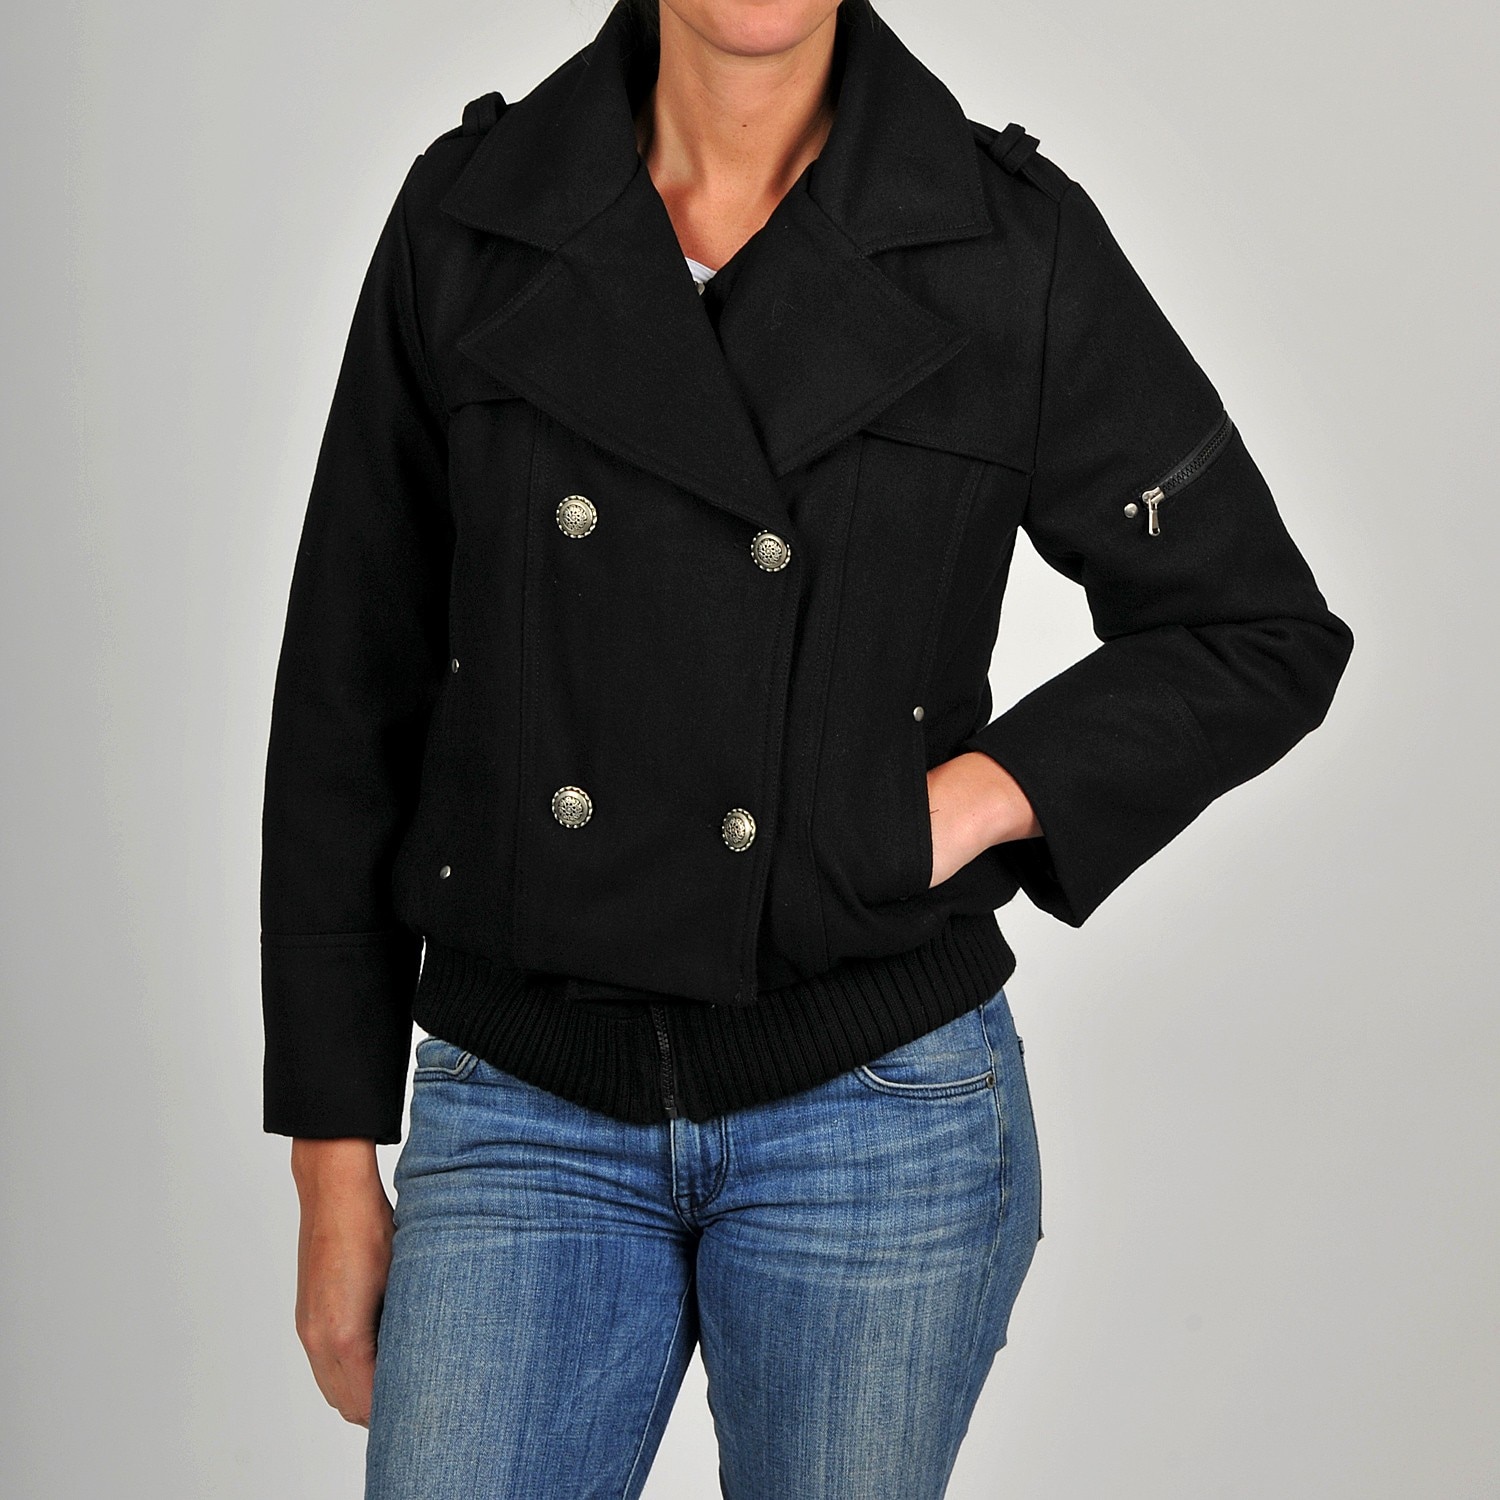 Excelled Womens Plus Size Double breasted Wool blend Peacoat 